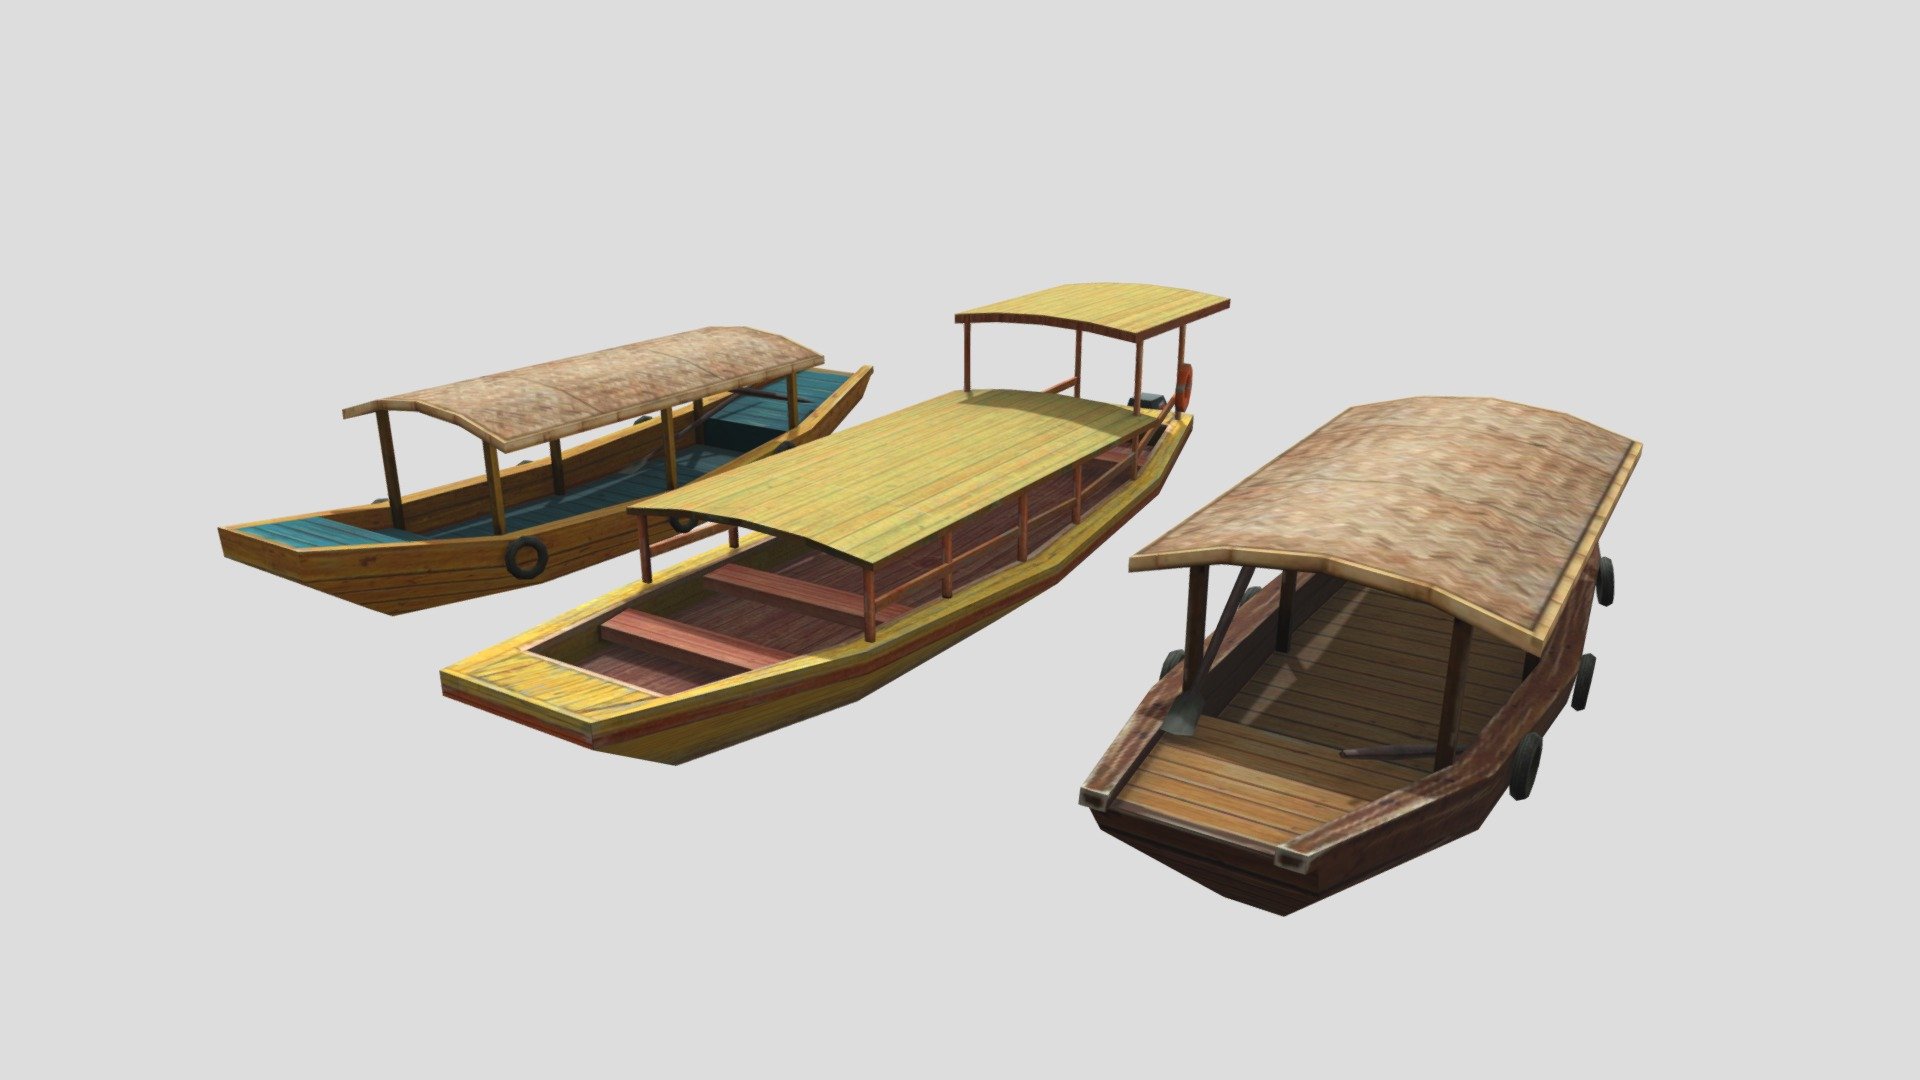 Wooden Boats
The model has an optimized low poly mesh with the greatest possible number of simplifications that do not affect photo-realism but can help to simplify it, thus lightening your scene and allowing for using this model in real-time 3d applications.

Real-world accurate model.  In this product, all objects are ERROR-FREE and All LEGAL Geometry. Subdivisions are not required for this product.

Perfect for Architectural, Product visualization, Game Engine, and VR (Virtual Reality) No Plugin Needed.

Format Type




3ds Max 2017 (standard shader)

FBX

OBJ

3DS

Texture

1 material used and texture use for each model. Total 3 diffuse texture only, No other texture.

You might need to re-assign textures map to model in your relevant software - Wooden Boats - Buy Royalty Free 3D model by luxe3dworld 3d model